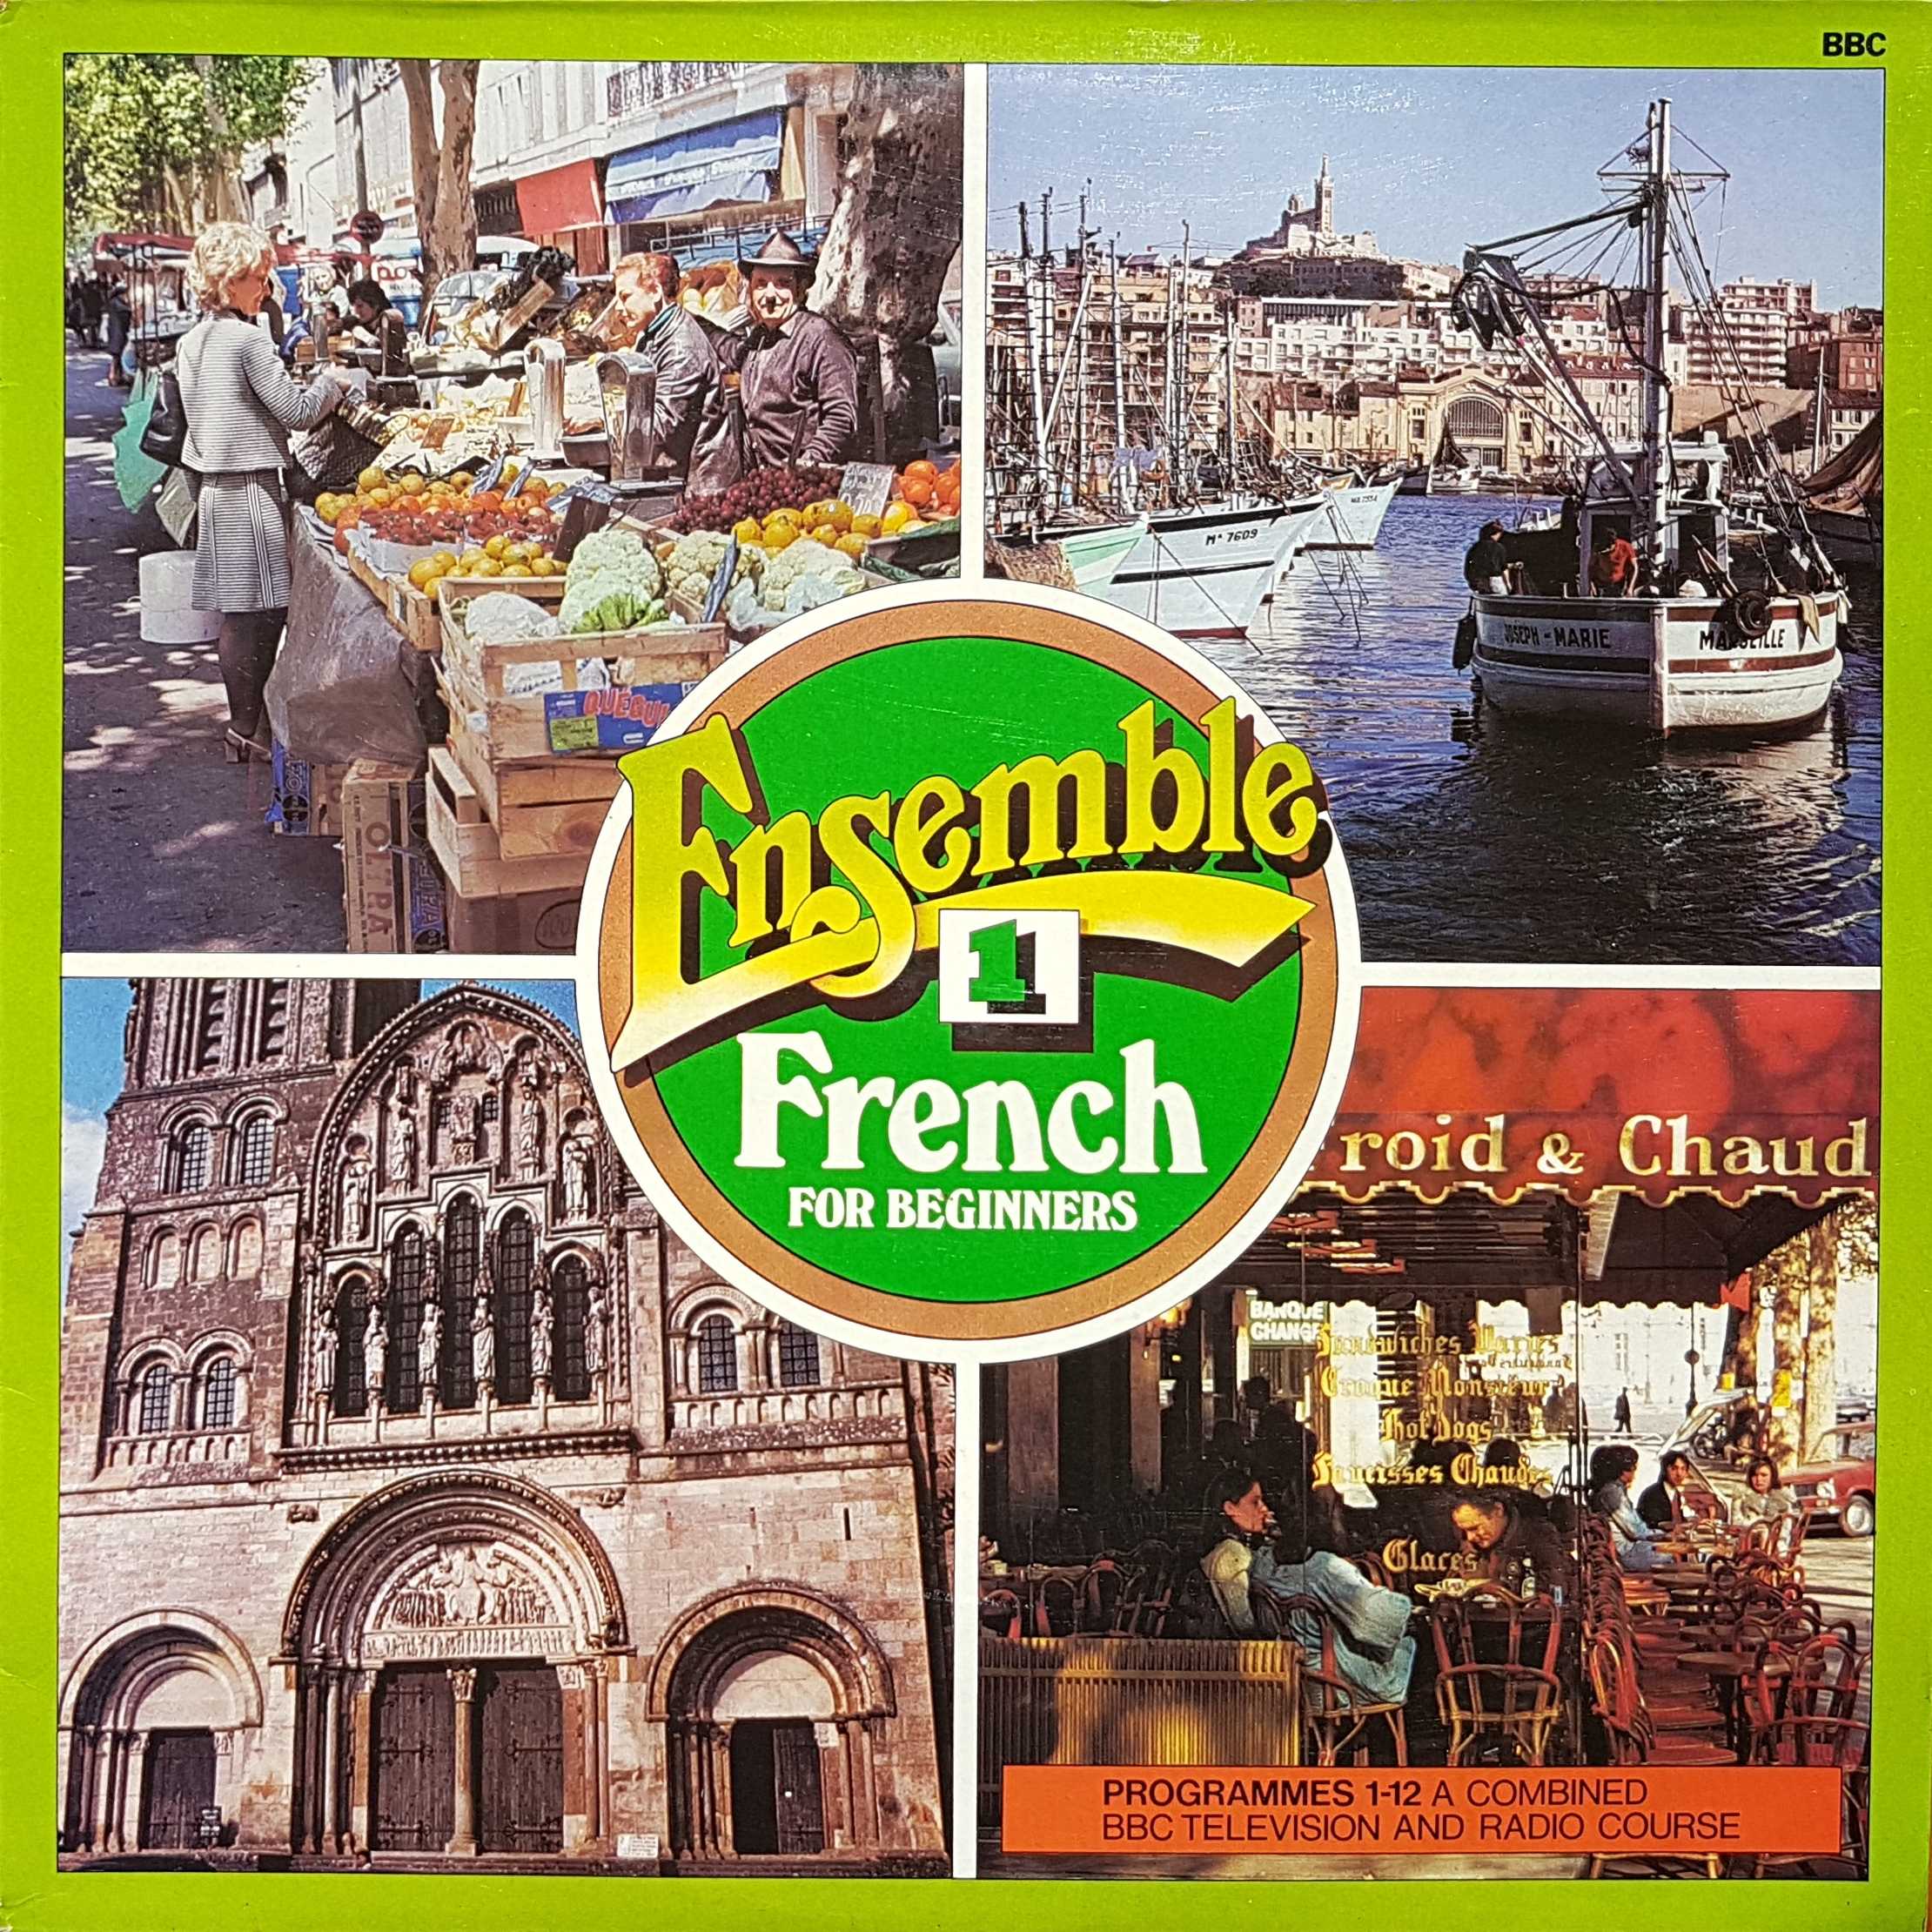 Picture of OP 216 Ensemble 1 - French for beginners - Programmes 1 - 12 by artist Various from the BBC albums - Records and Tapes library